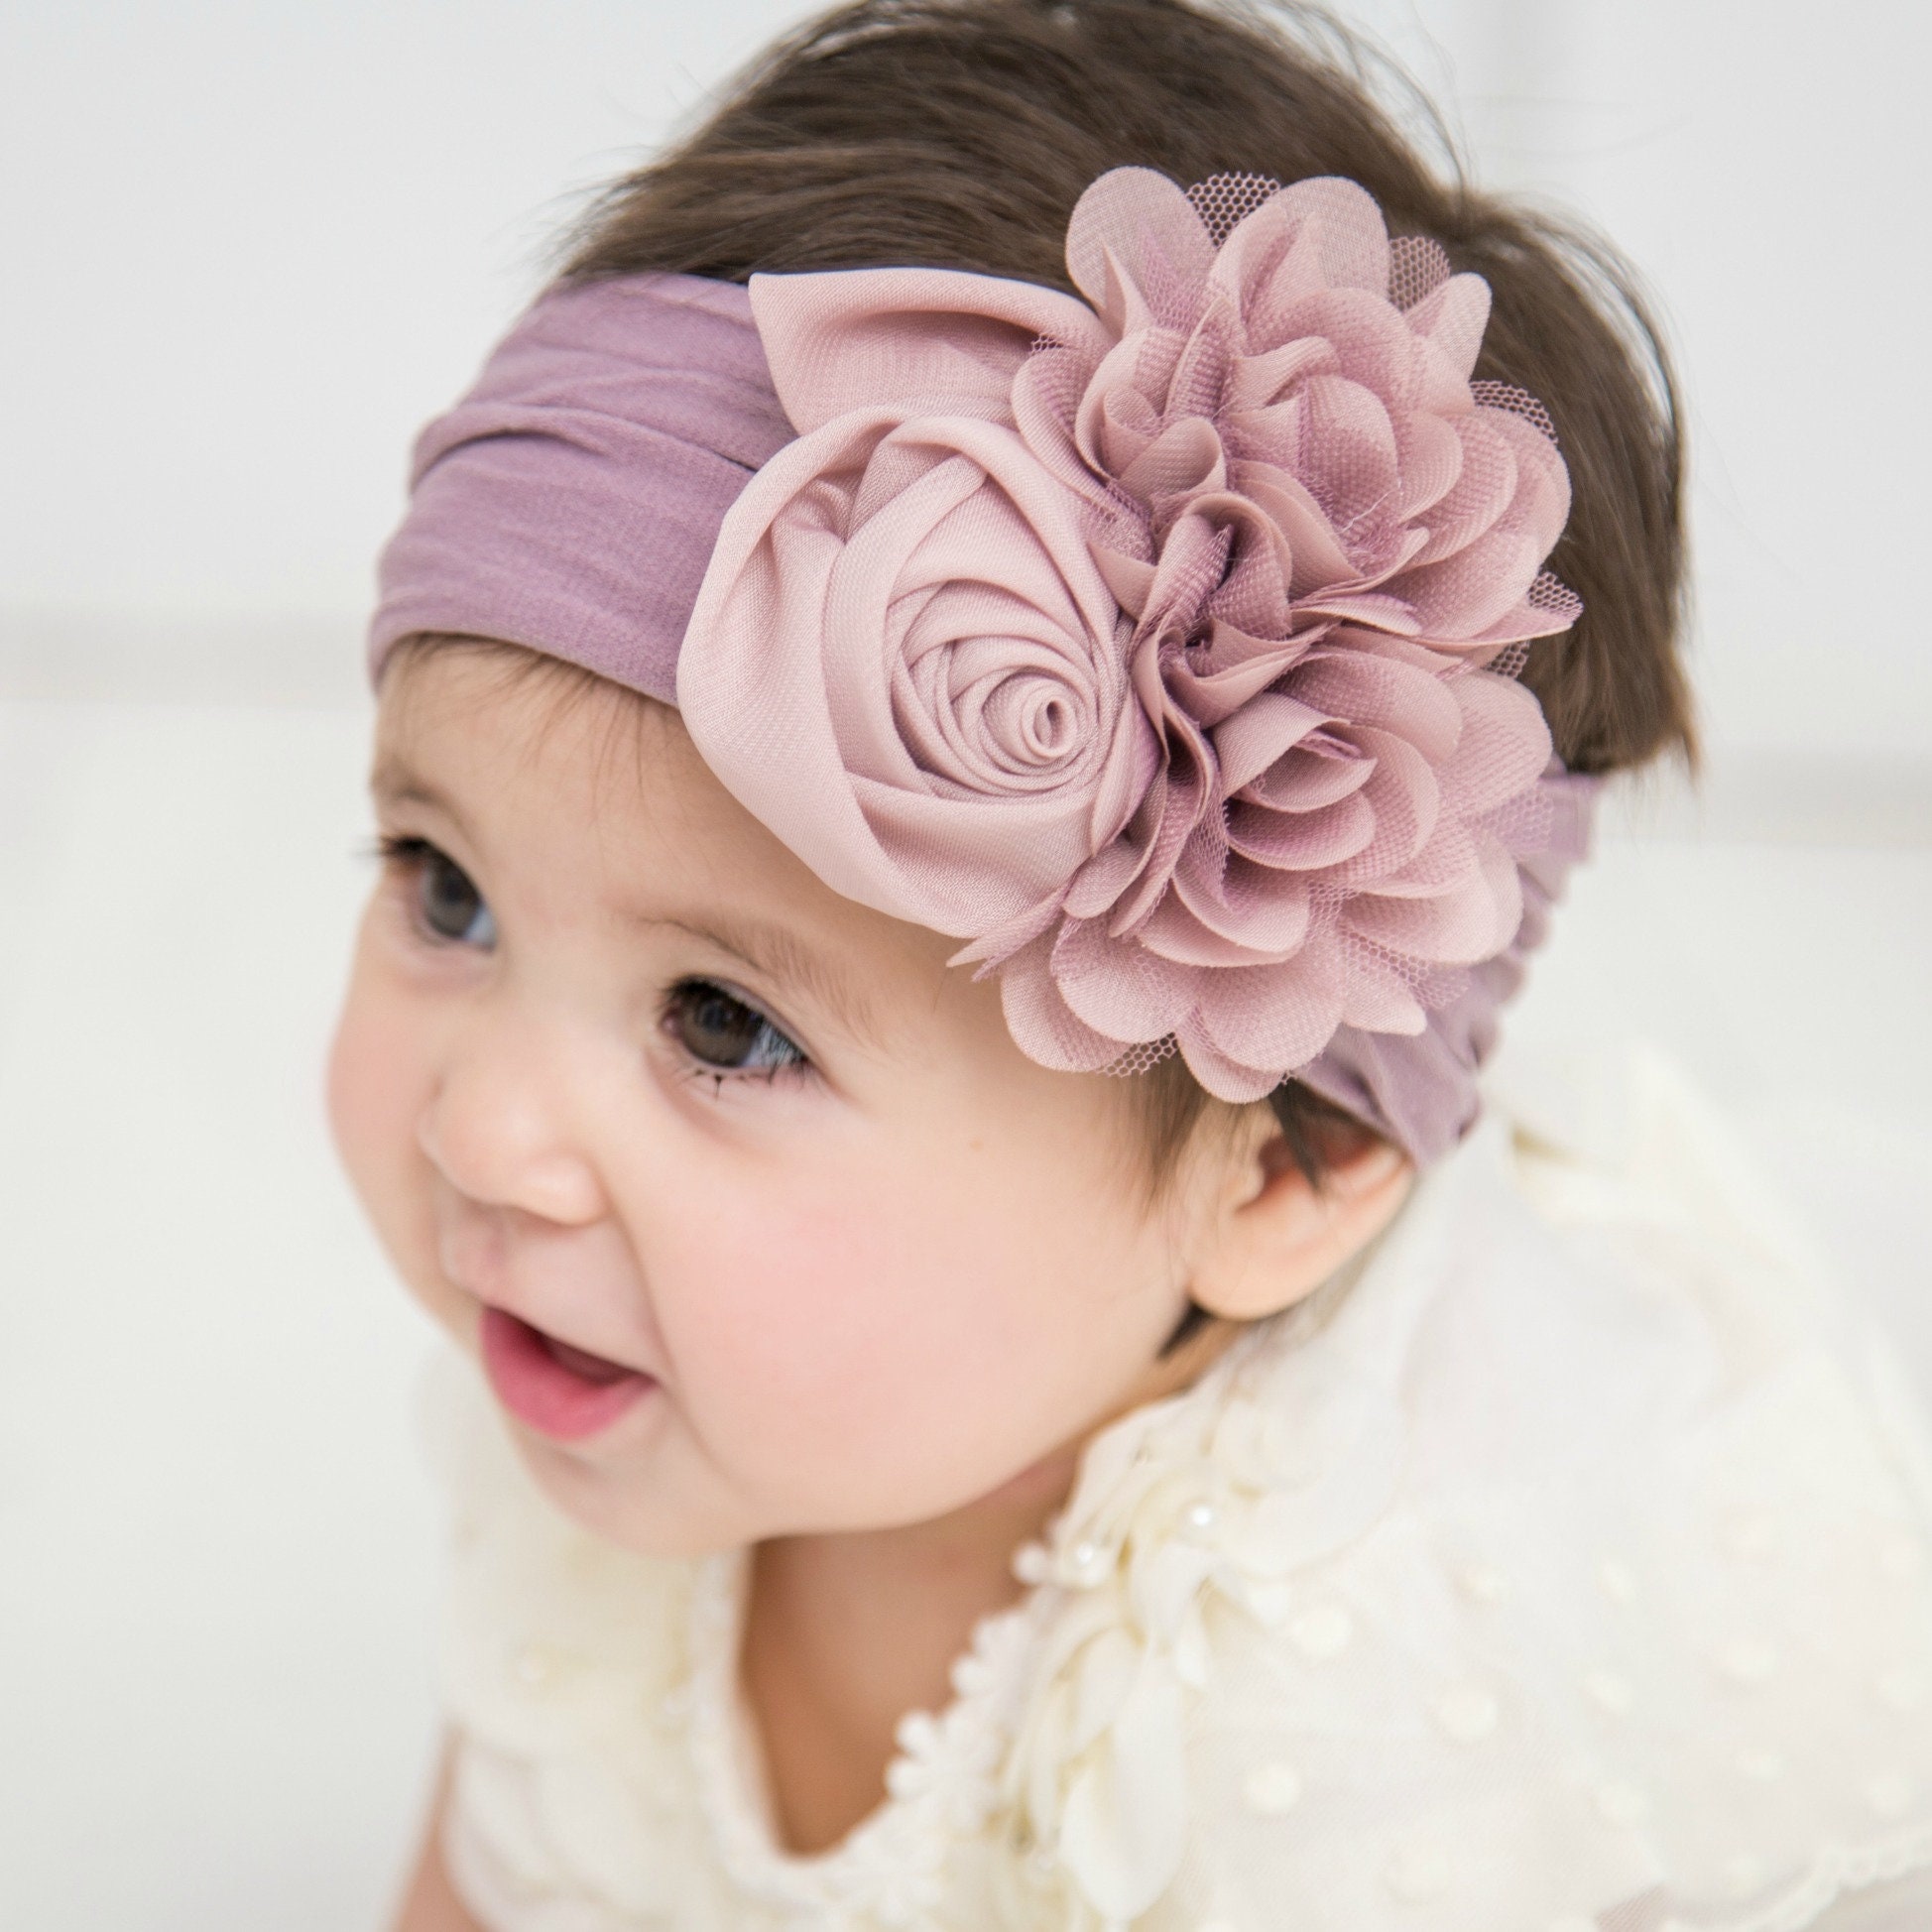 Baby Girls Flower and Bows Headbands Floral Head Wraps Nylon Elastic for Newborn Infant Toddlers by JIAHANG 